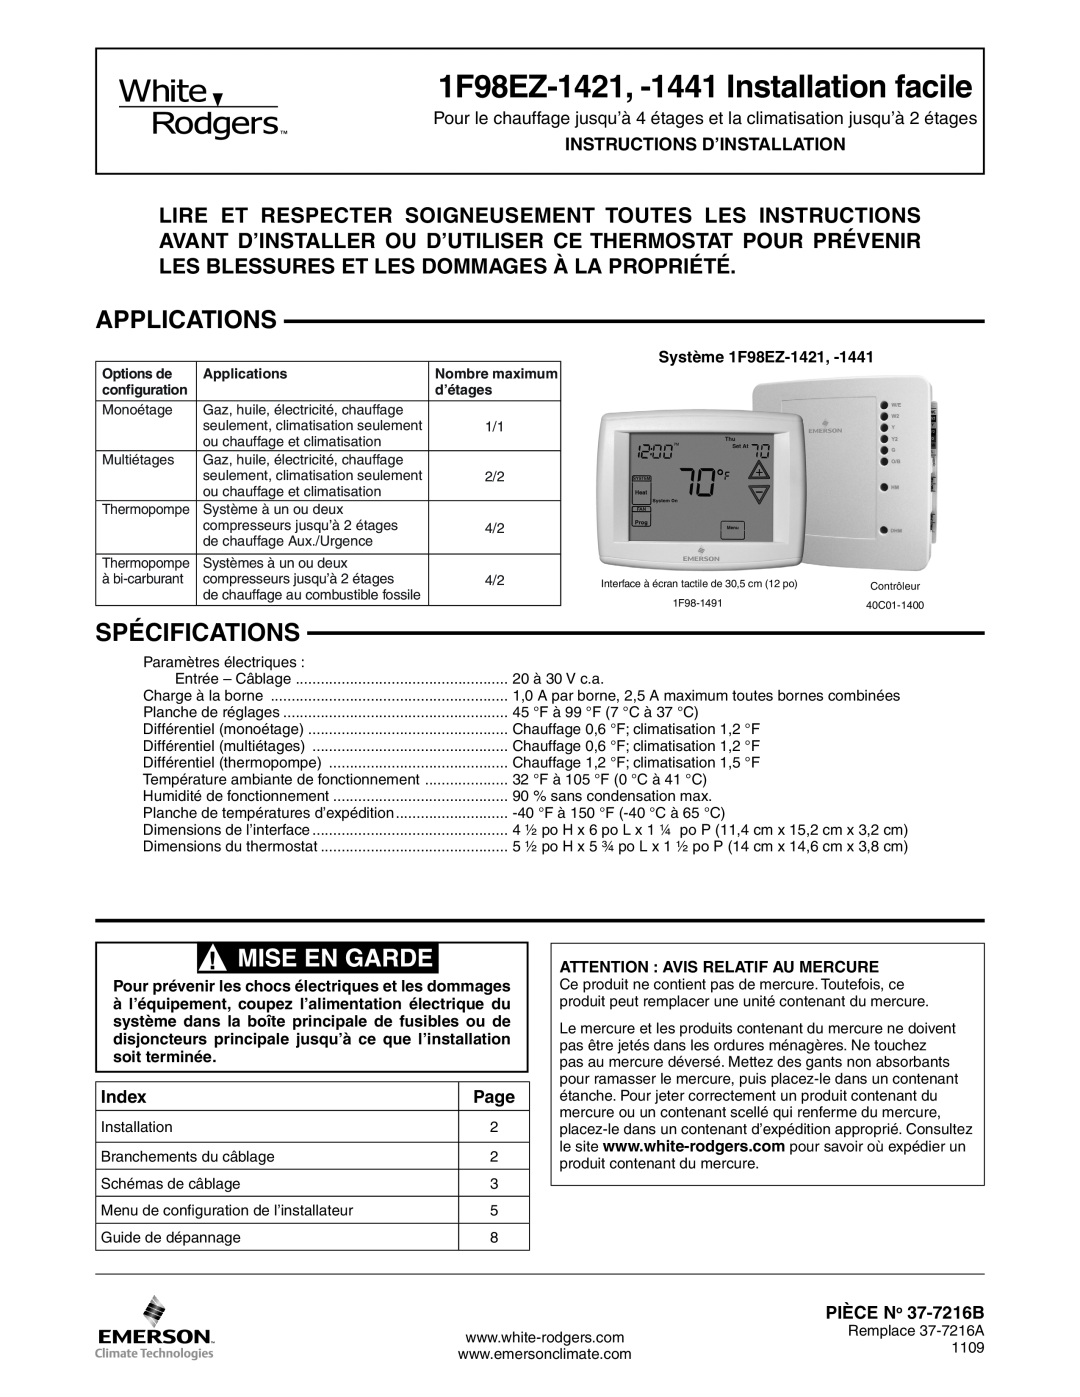 White Rodgers 1F98EZ-1421 dimensions Applications, Spécifications, Instructions D’Installation, Index, Page 